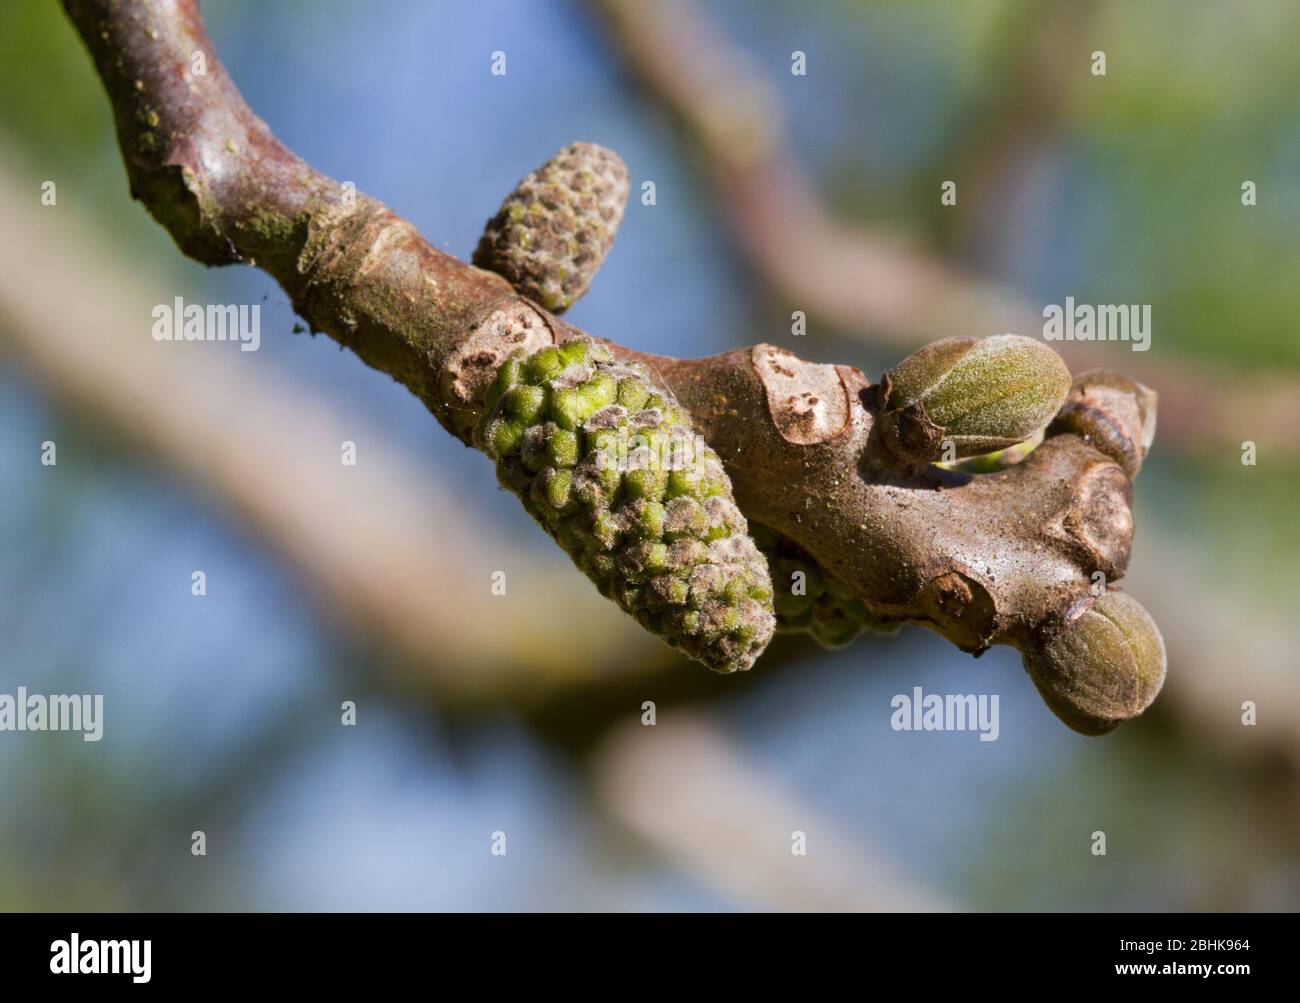 Male flowers, catkins, and budding leaves of Common walnut tree in spring Stock Photo